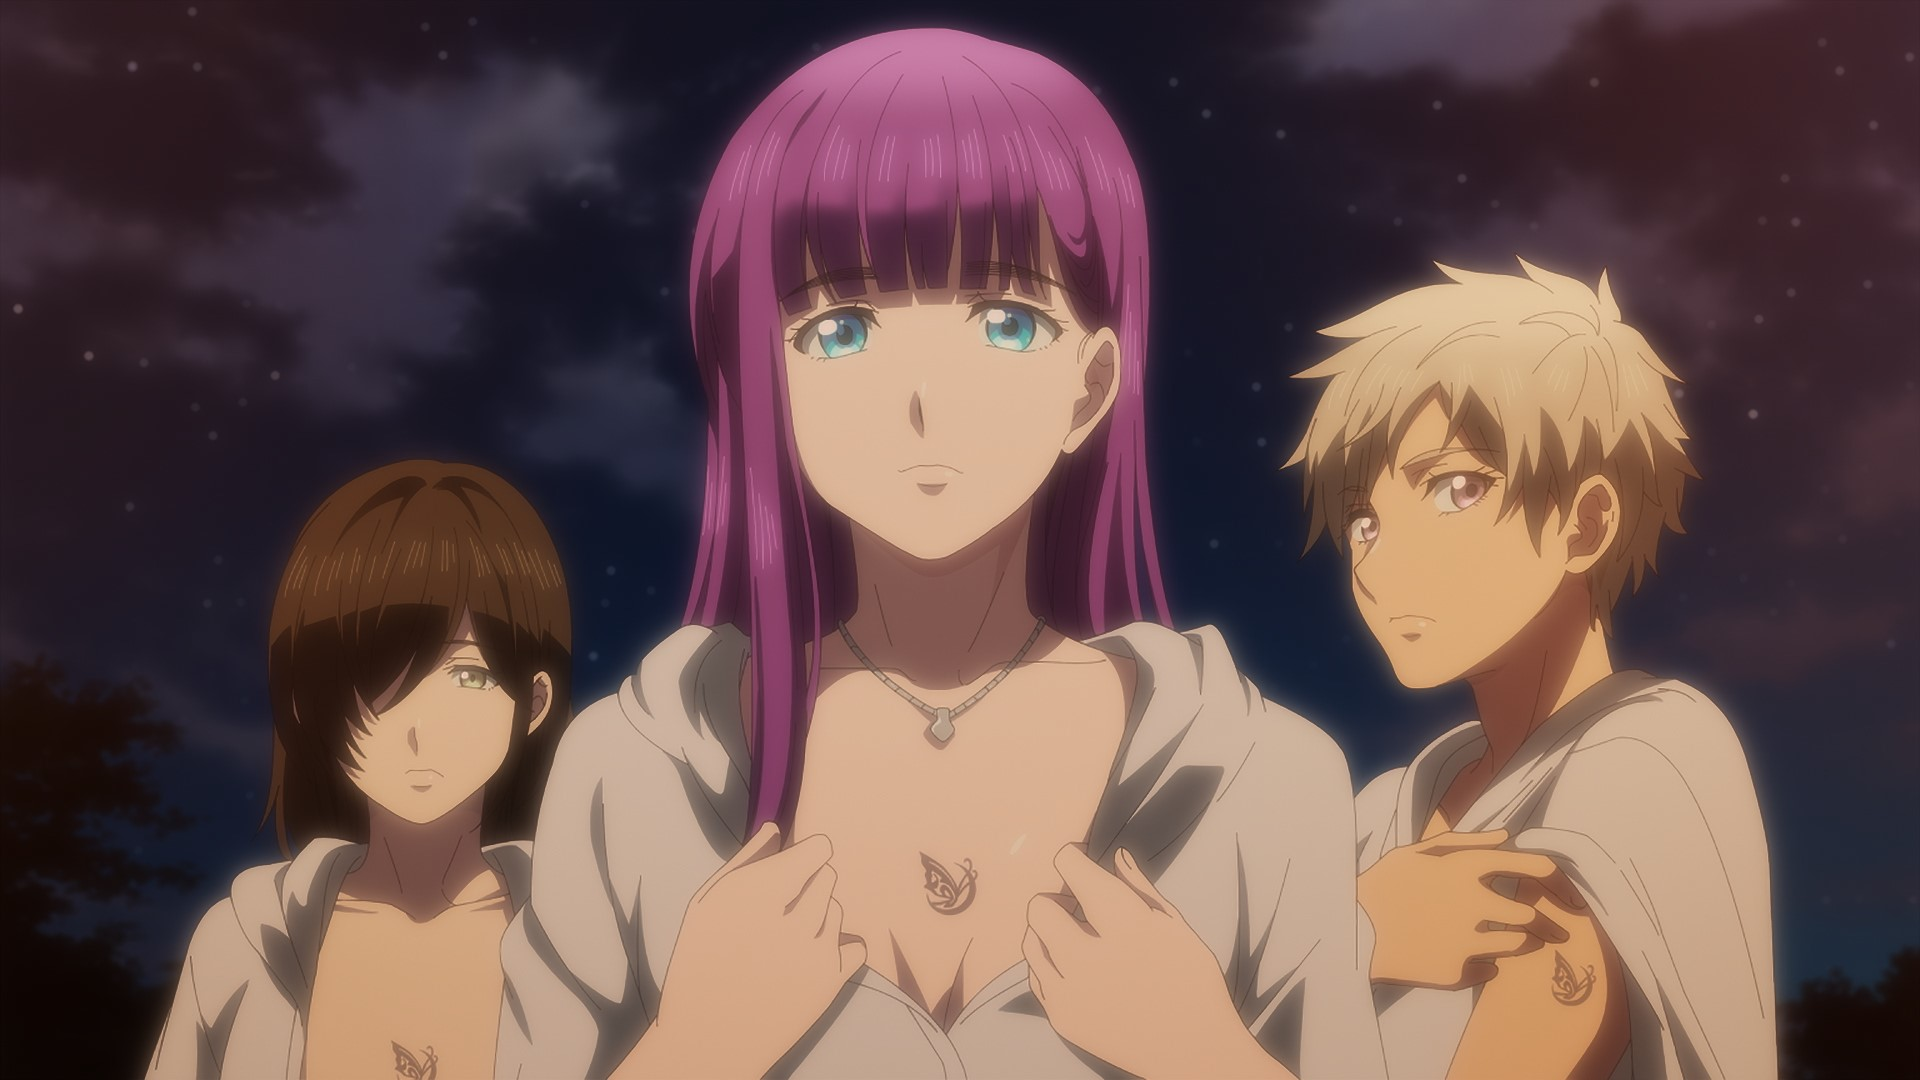 World's End Harem: Where to Watch and Stream Online